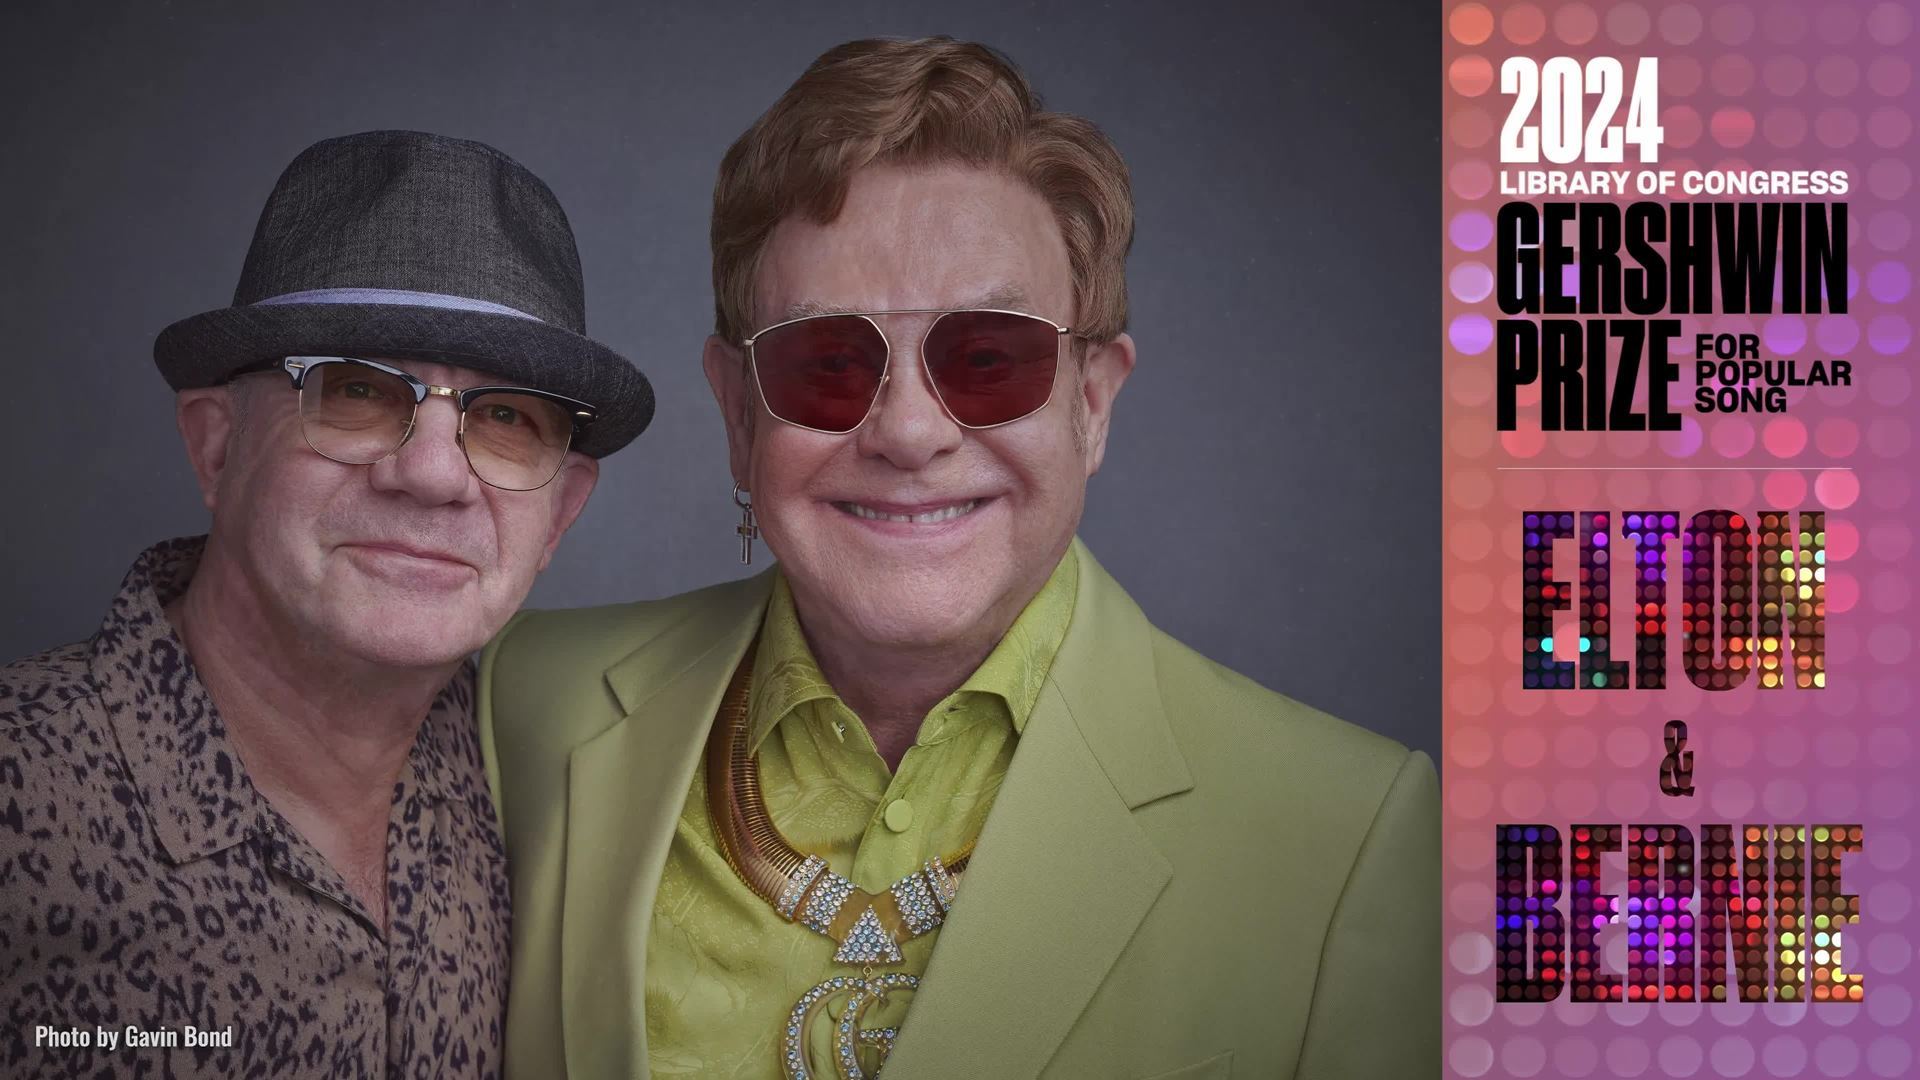 Elton John and Bernie Taupin to Receive Library of Congress Gershwin Prize